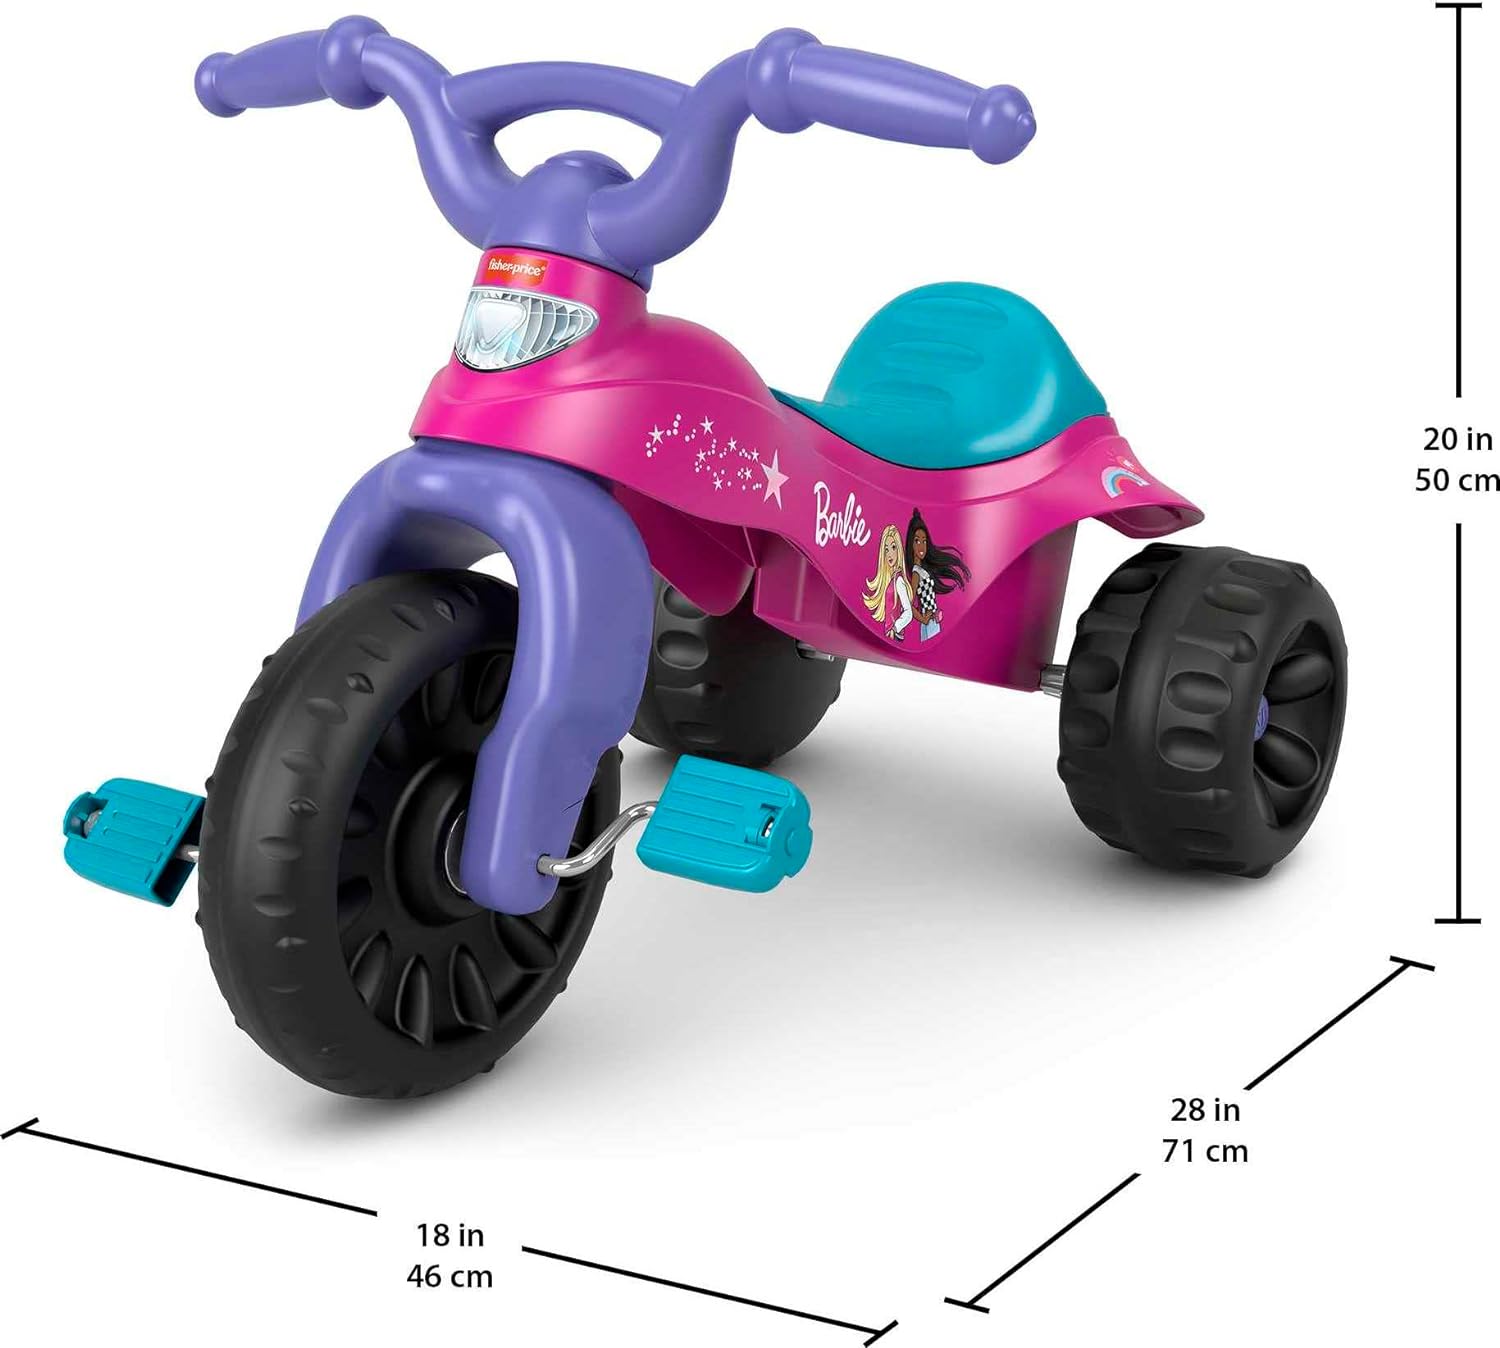 Fisher-Price Barbie Tricycle with Handlebar Grips and Storage Area, Multi-Terrain Tires, Tough Trike